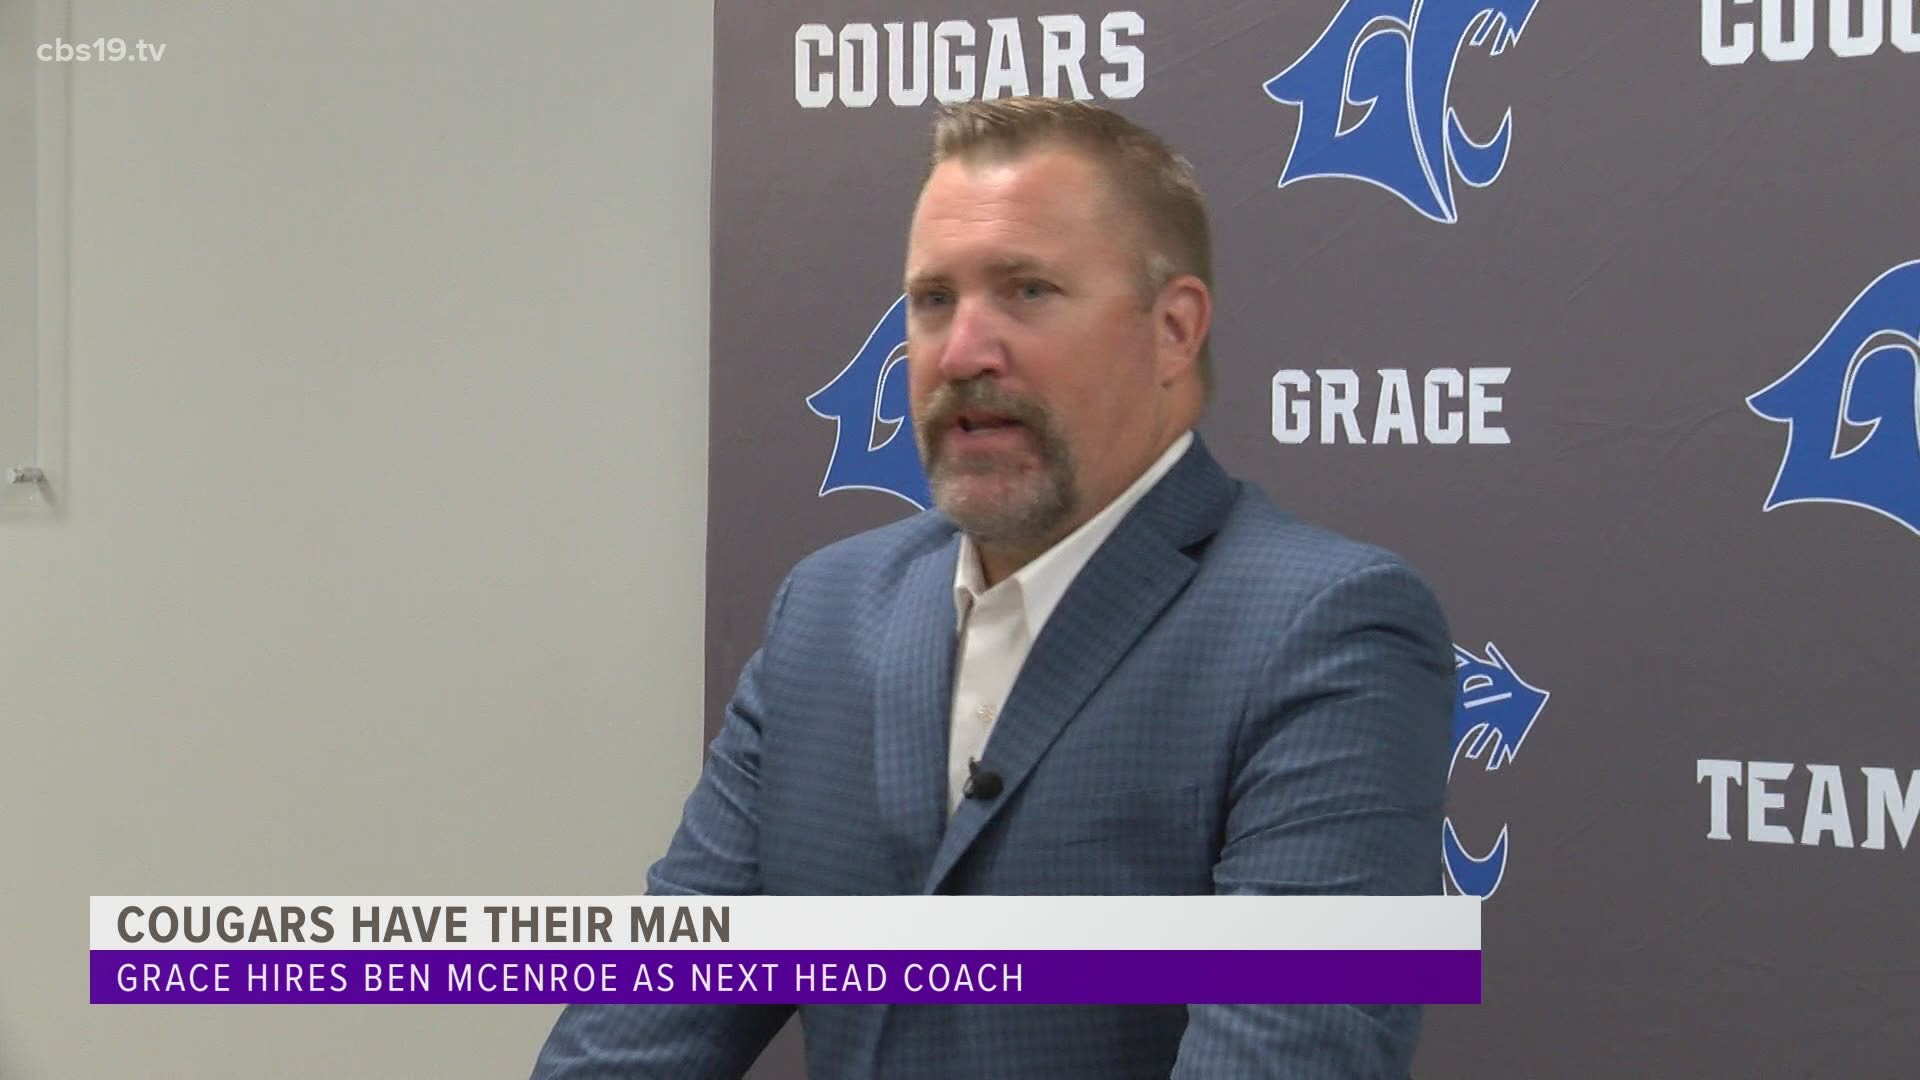 After serving 14 years as the head coach of California Lutheran, Ben McEnroe has accepted the position as the next Head Football coach of the Grace Cougars